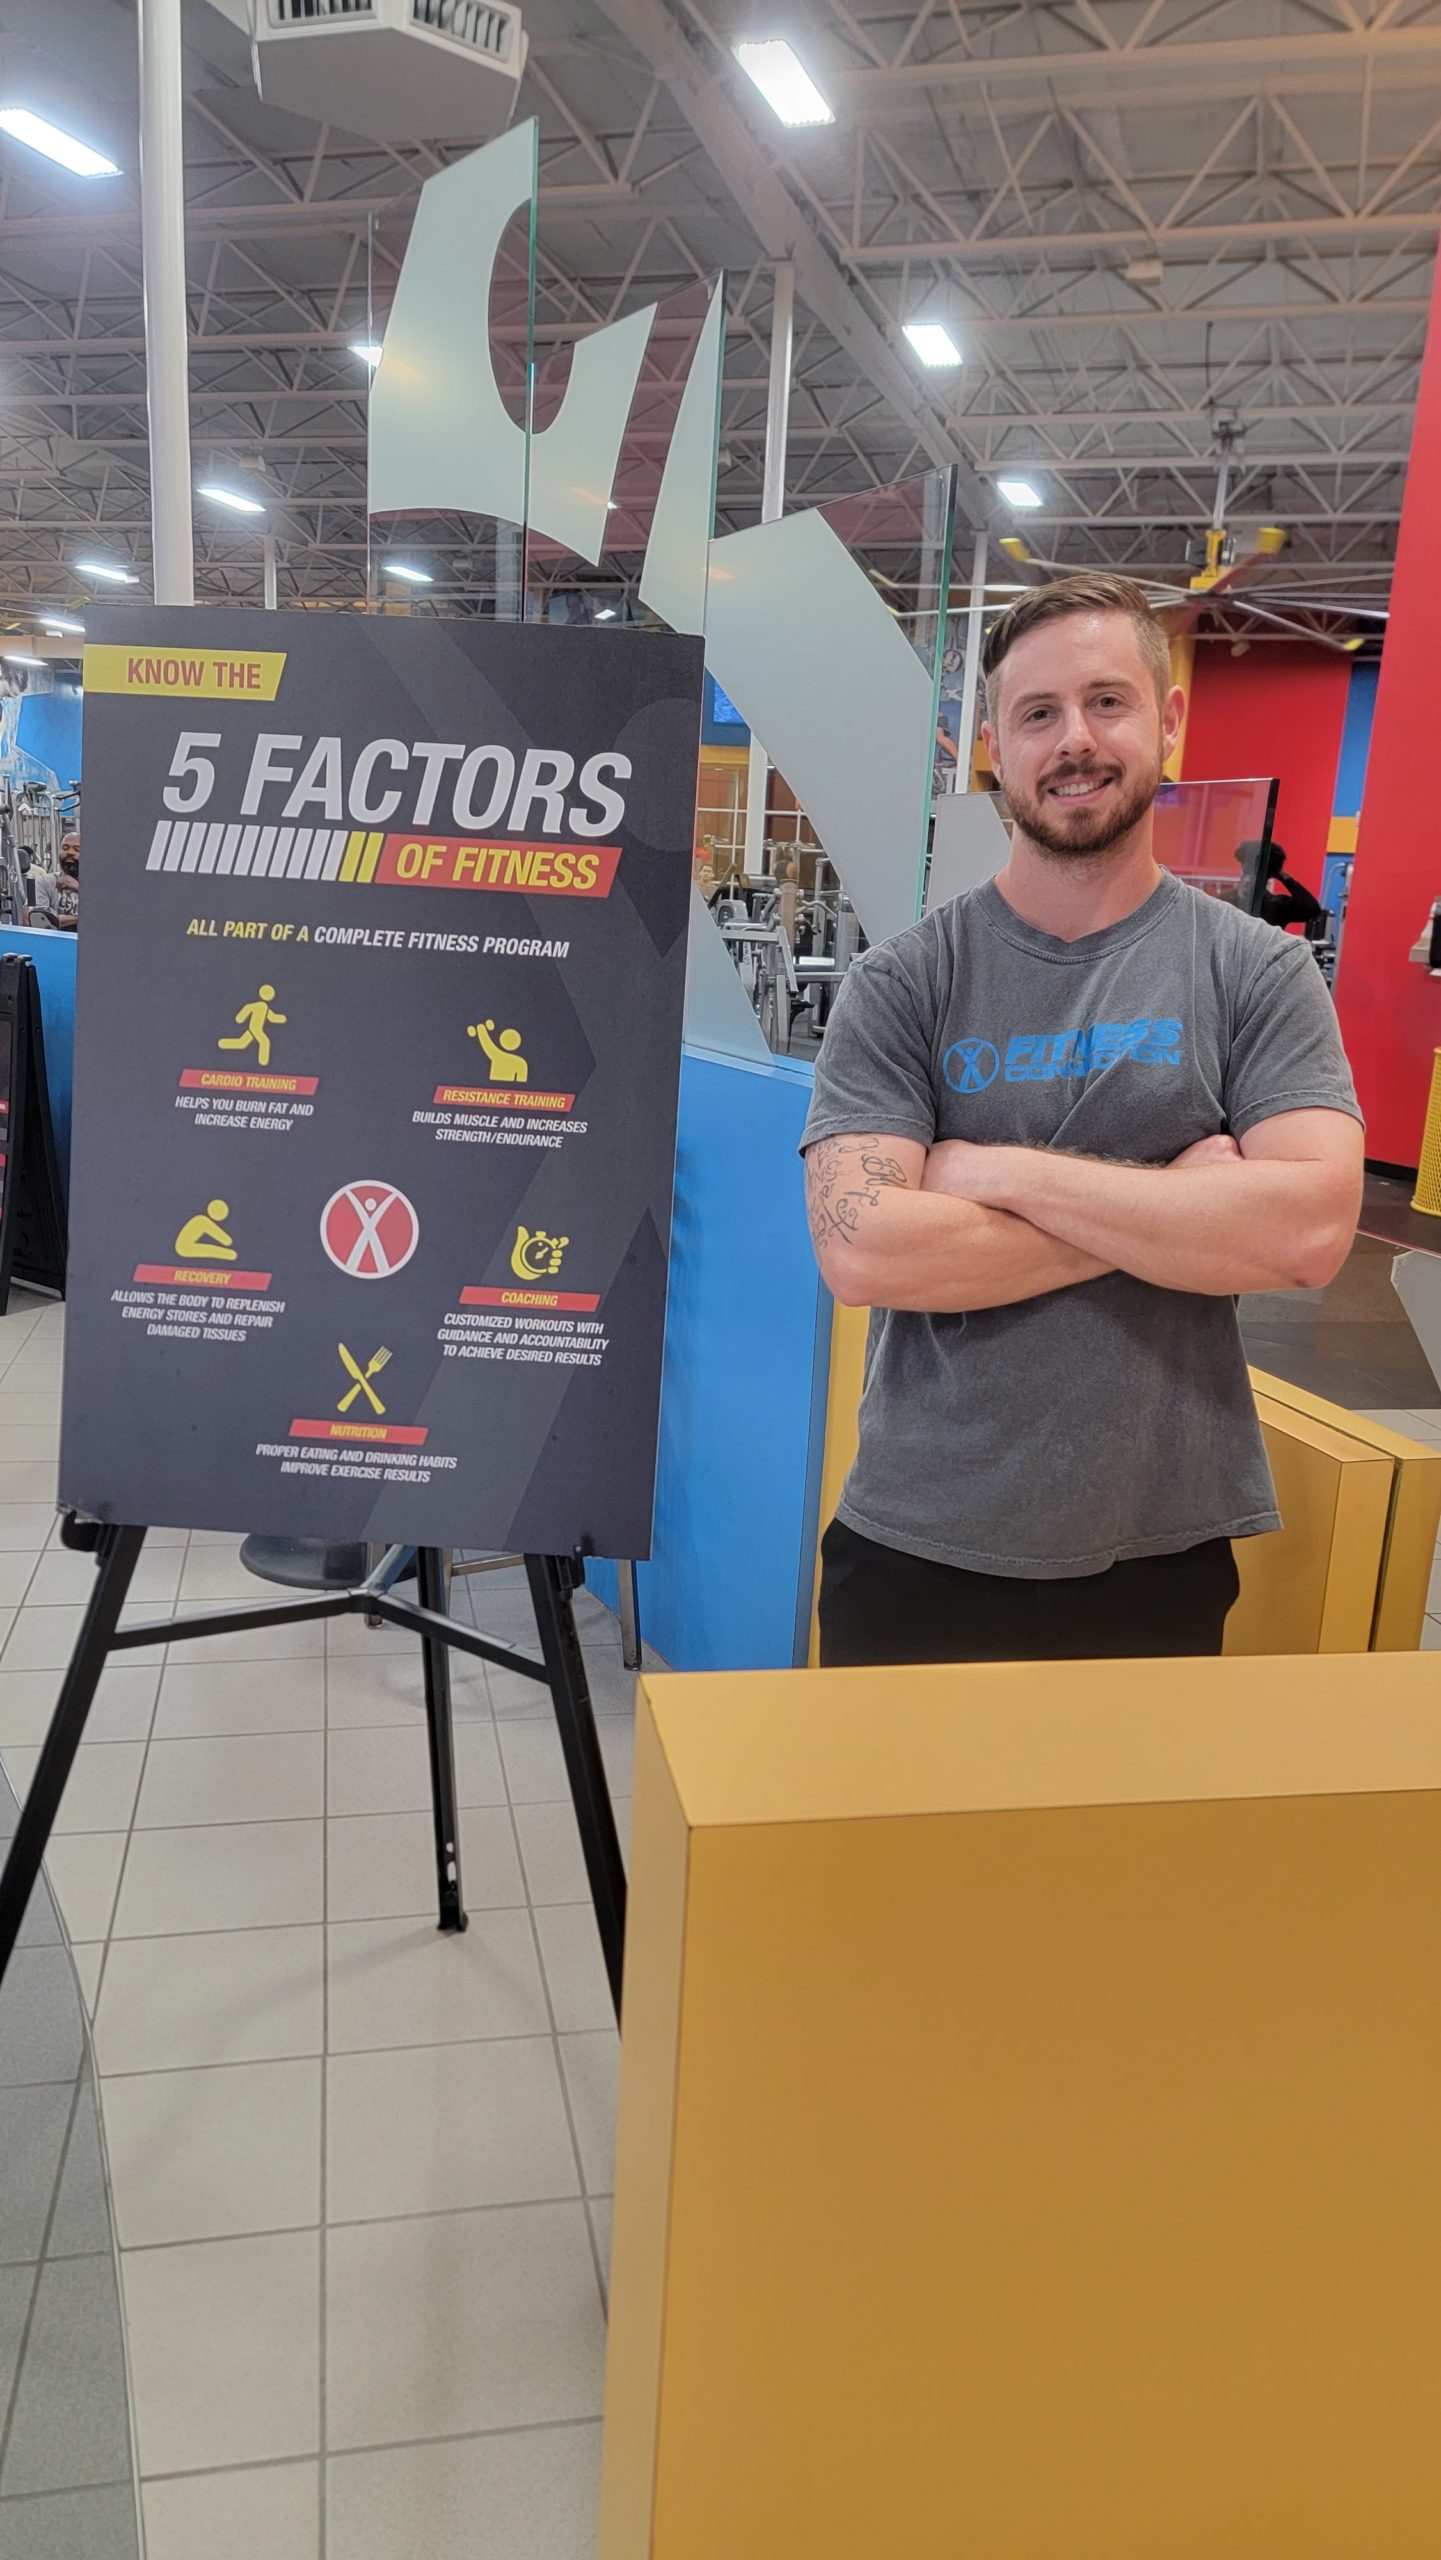 David K. is the club manager at Fitness Connection Bissonnet